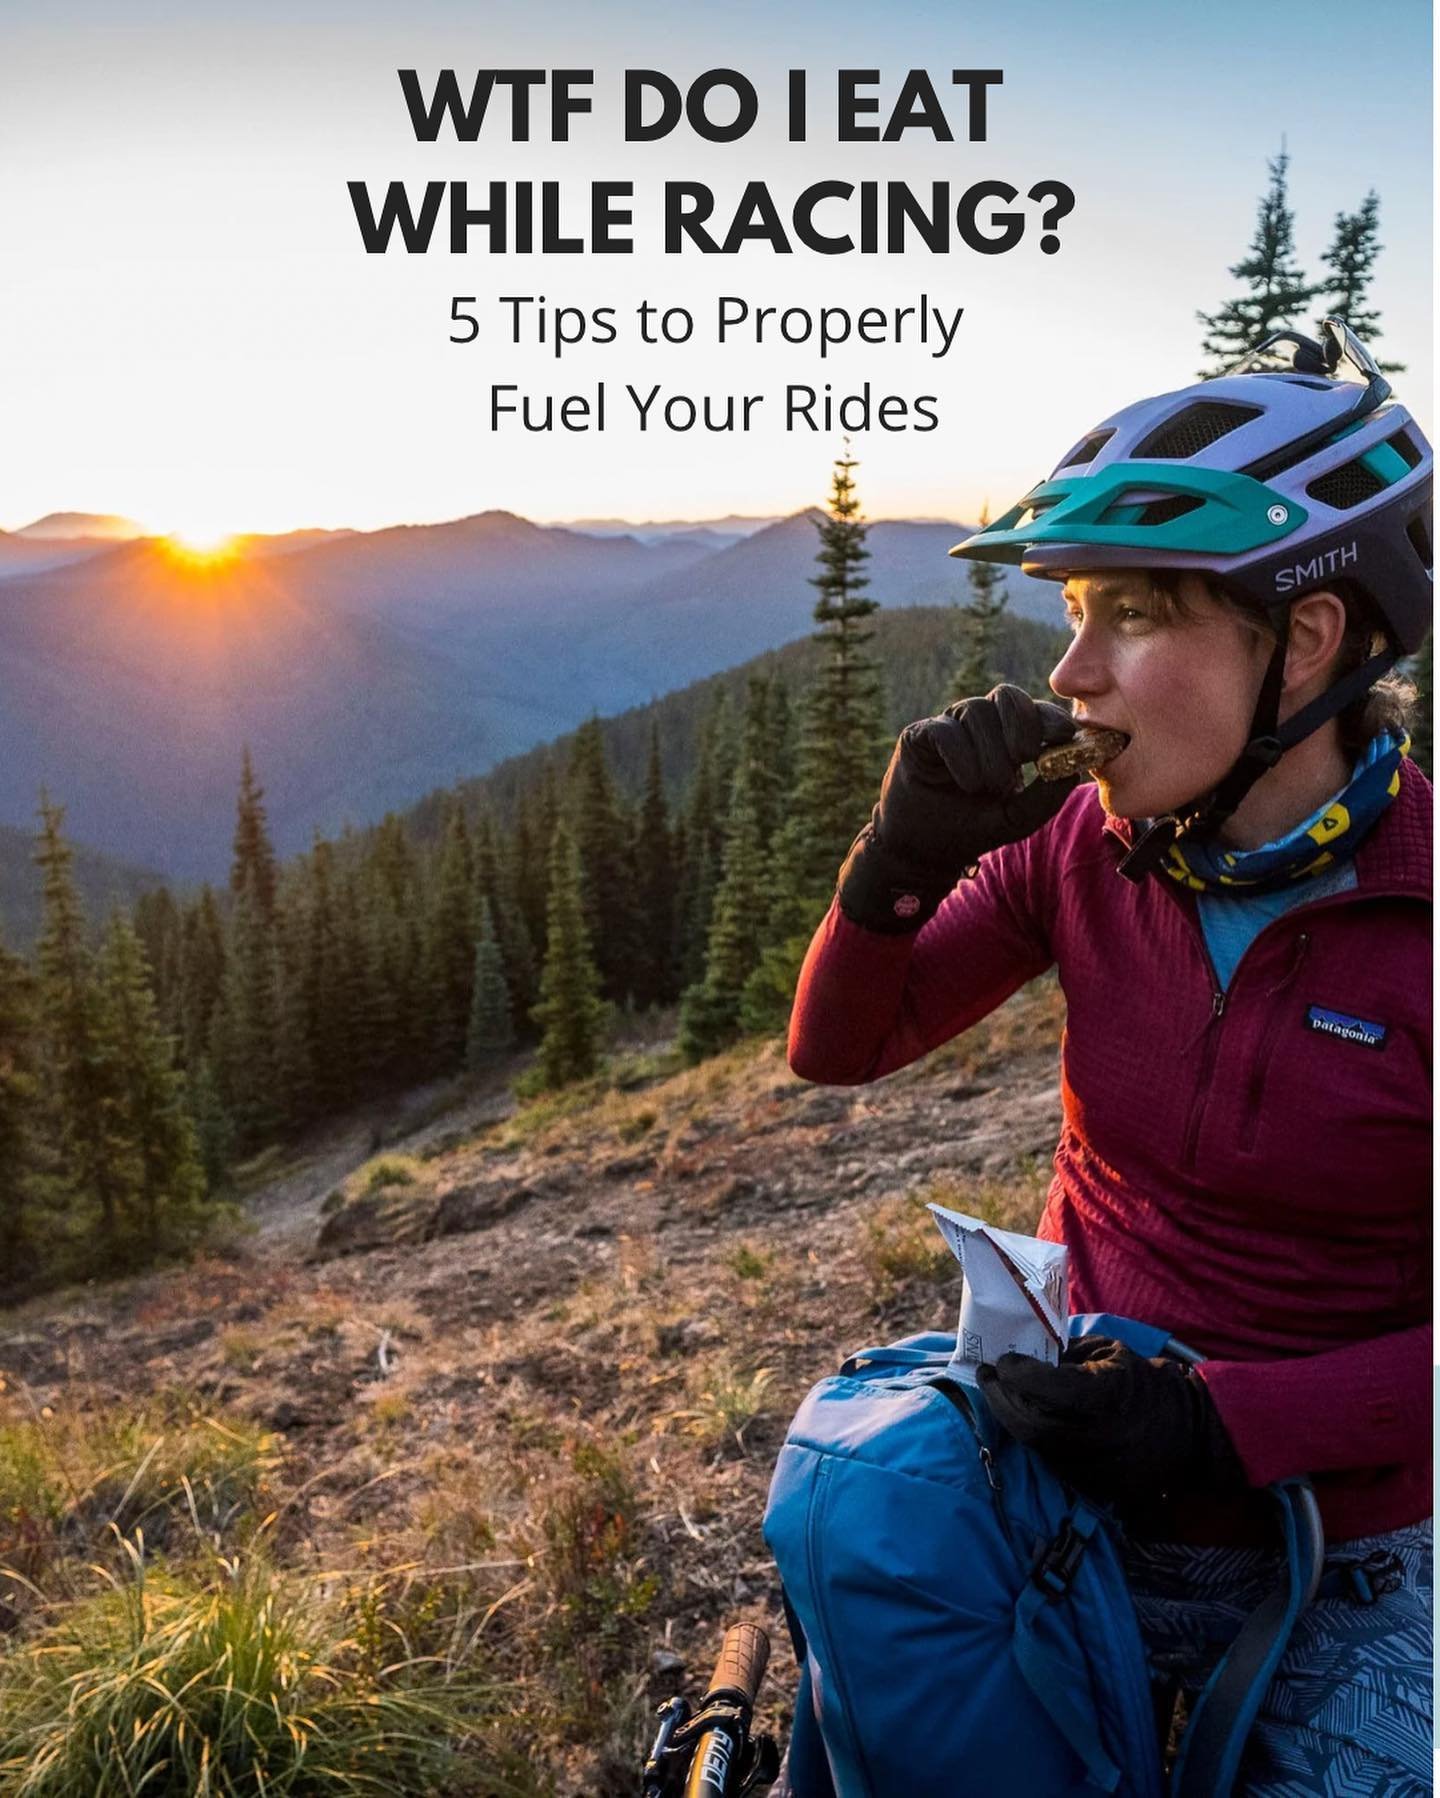 Race season is here!

Let&rsquo;s make sure you&rsquo;re properly fueled up while out on the trails!

I hope you find these slides helpful. If you want more info, tap the link in my bio to read the full article, or check out the article, &ldquo;WTF D